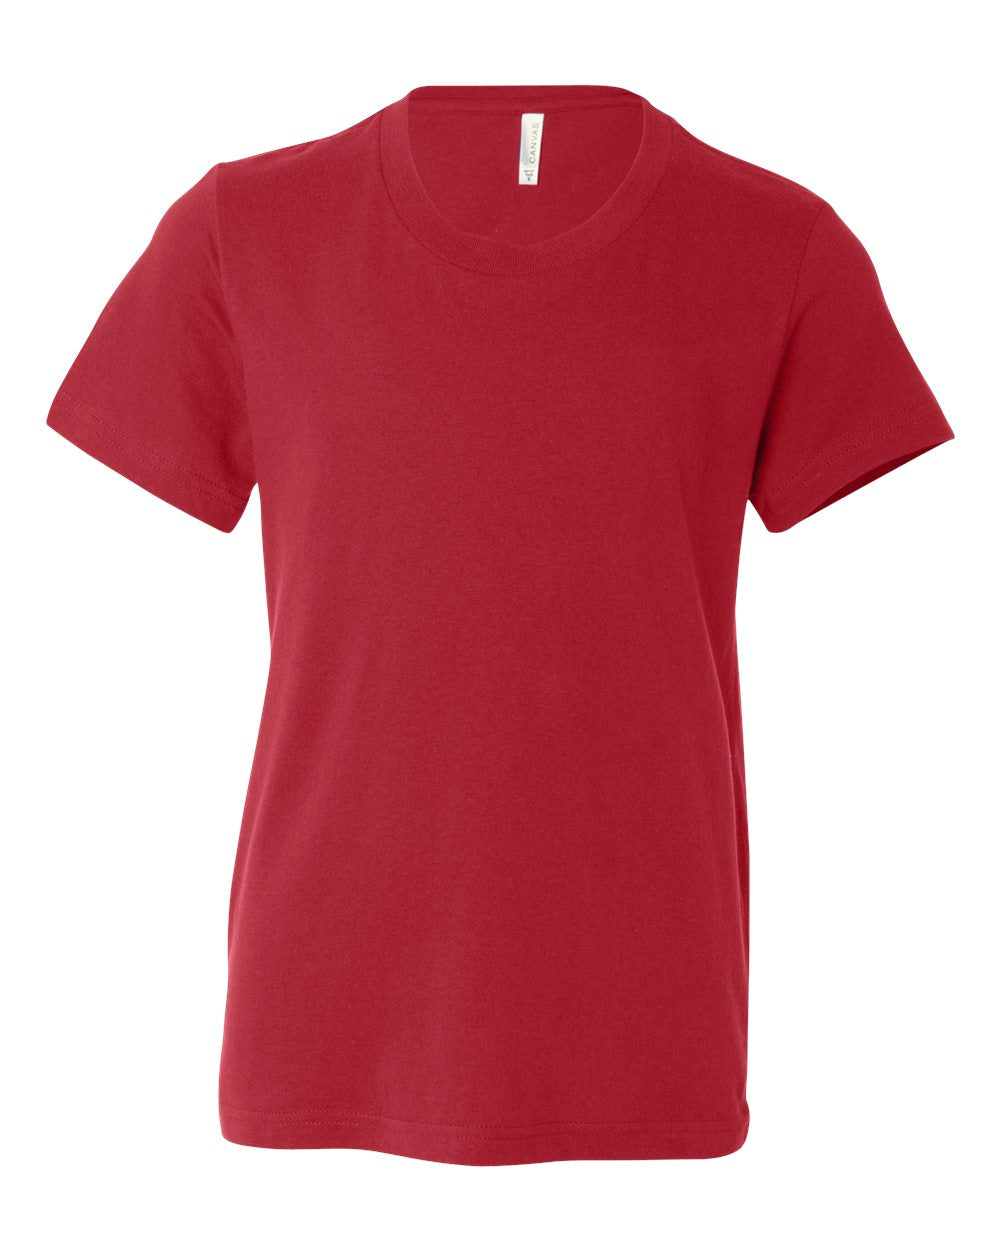 bella+canvas youth t-shirt red